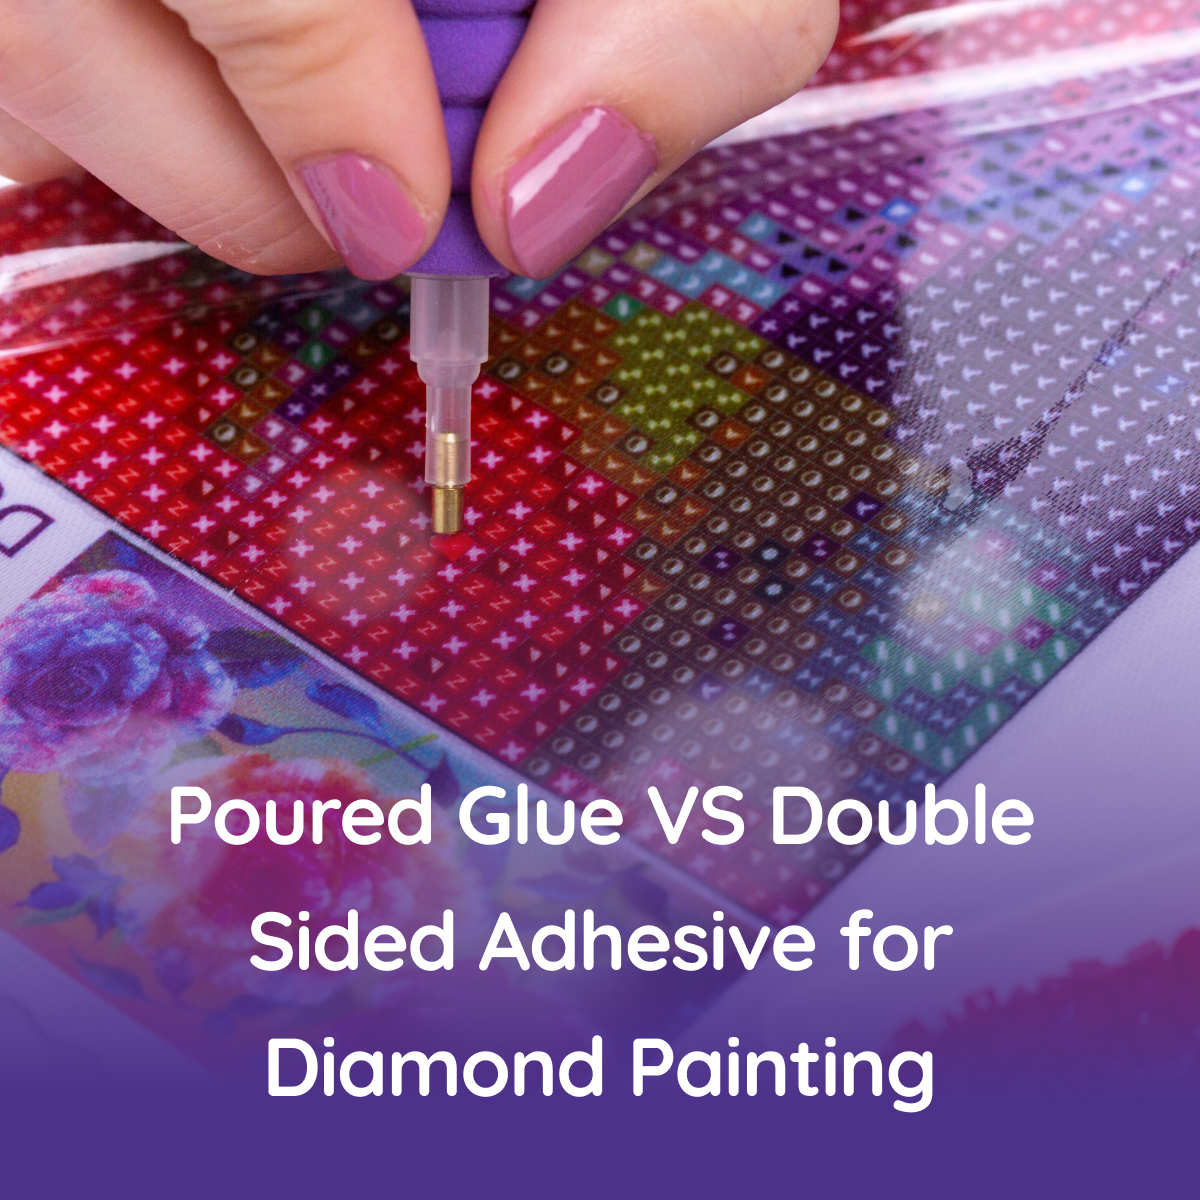 Poured Glue VS Double Sided Adhesive for Diamond Painting - Dreamer Designs